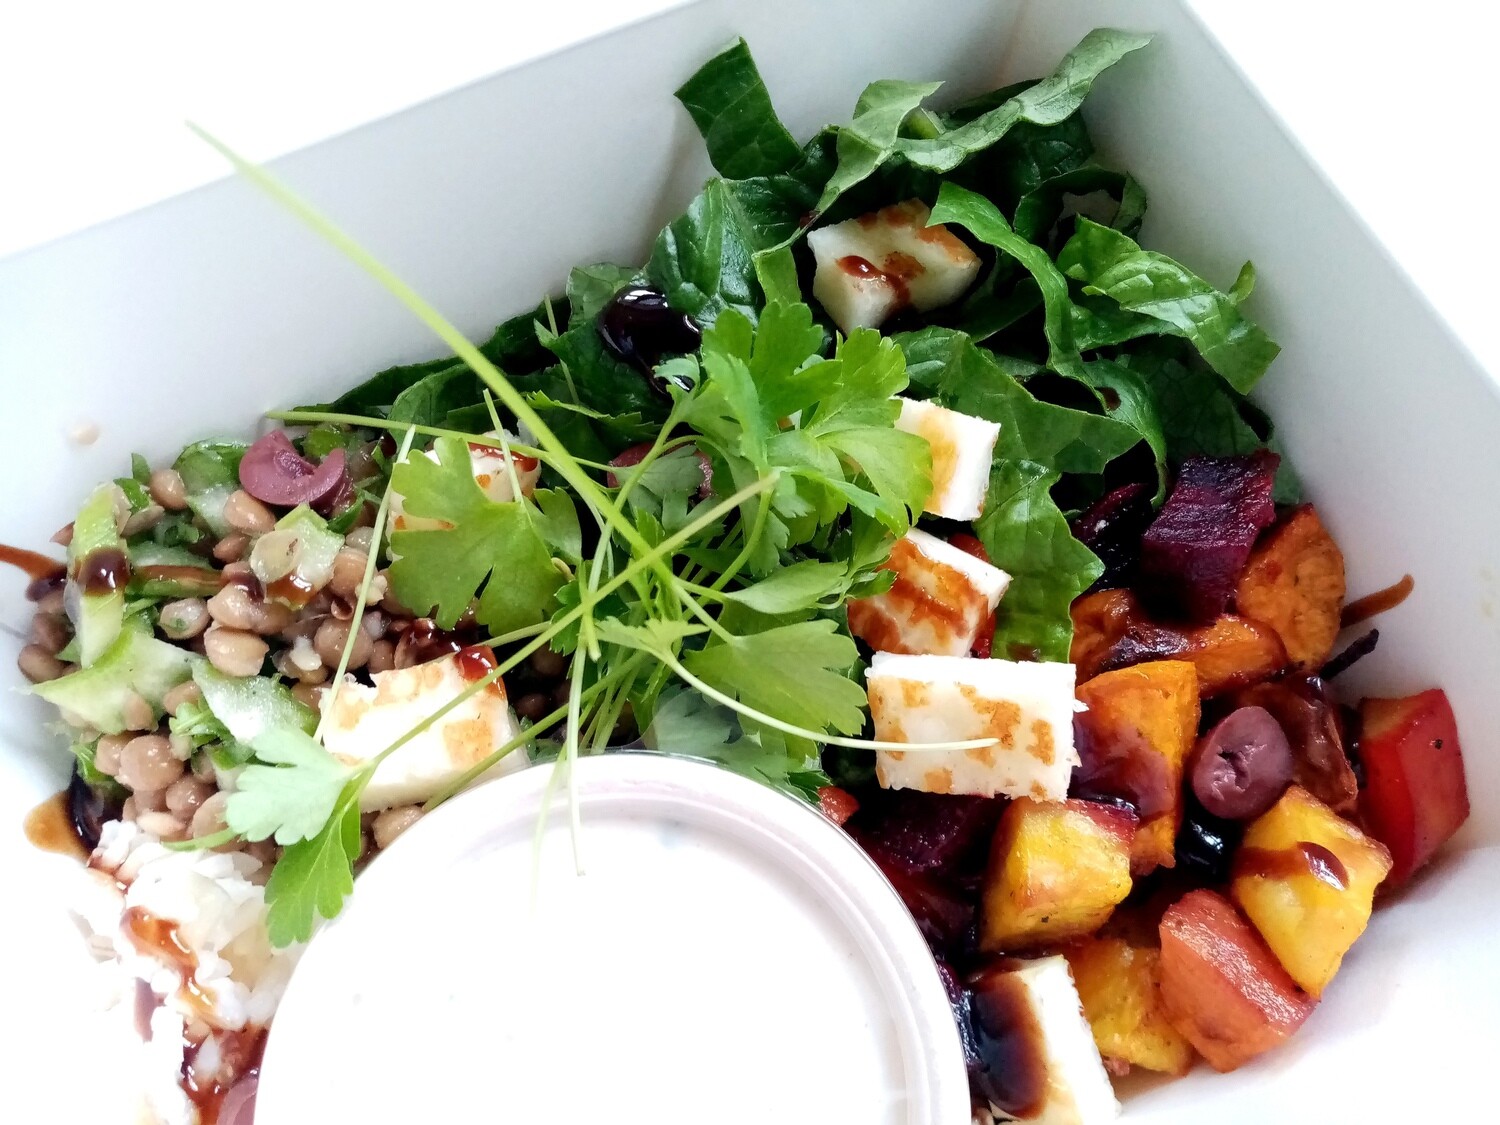 RISE BOX: Maroccan spiced, roasted vegetables and olives, brown rice, marinated lentils, panfried haloumi, cos lettuce, herbed yoghurt sauce, fig-balsamic glaze.